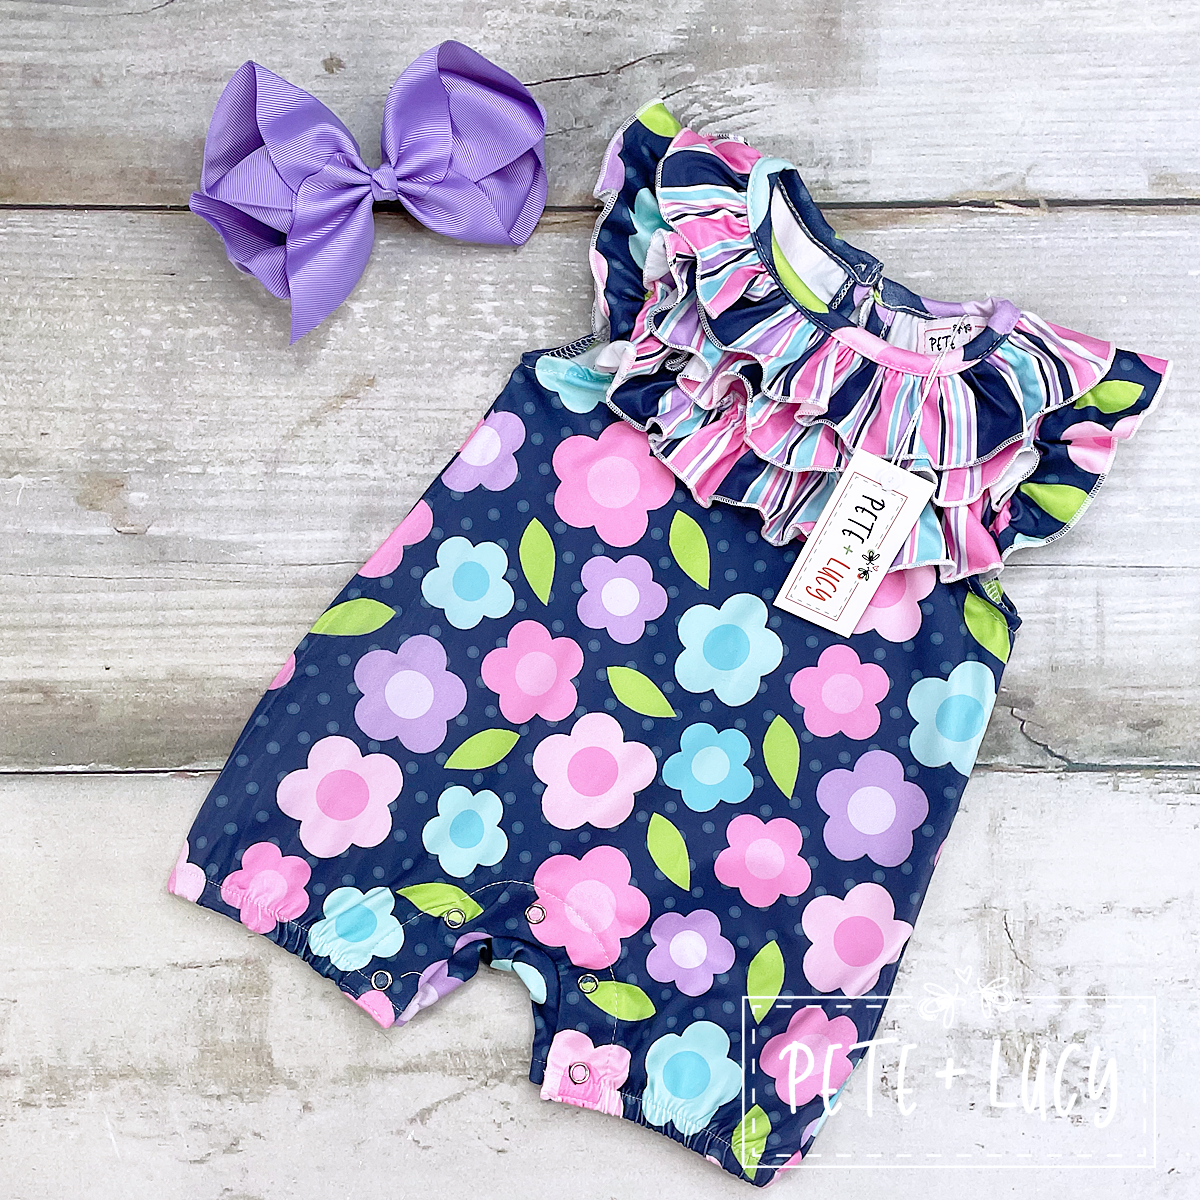 Navy Blue Romper with Flowers and striped ruffles